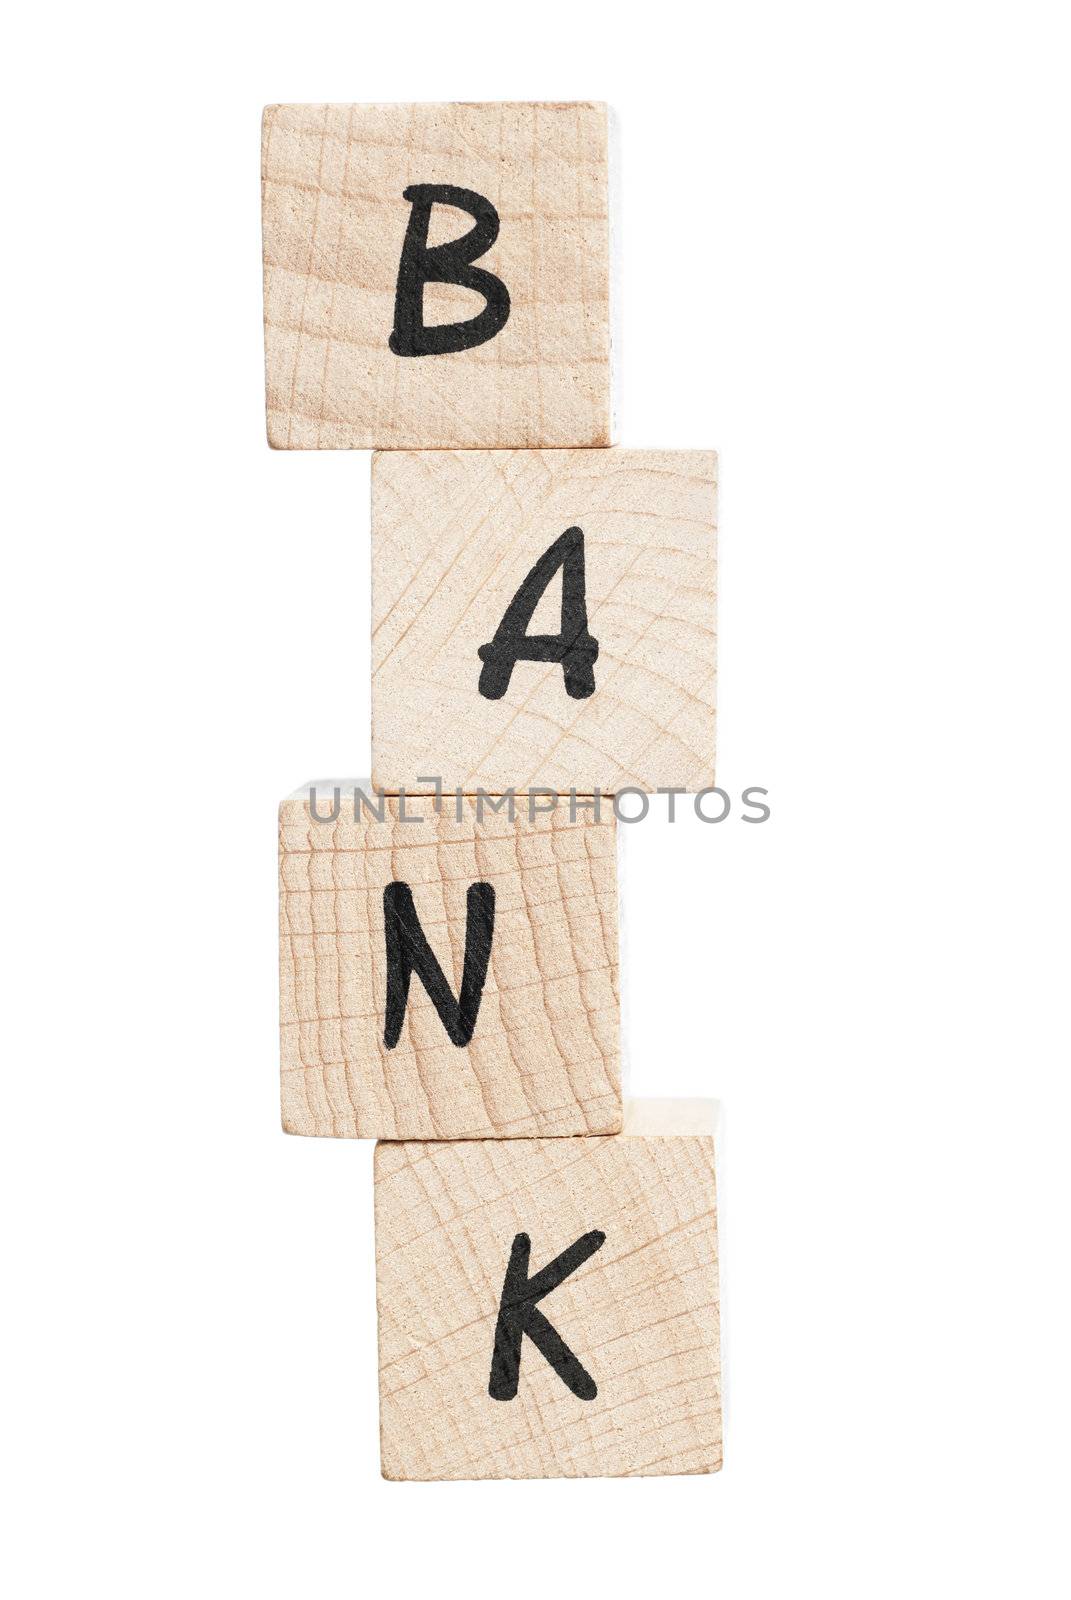 Word Bank Written With Wooden Blocks. by swellphotography